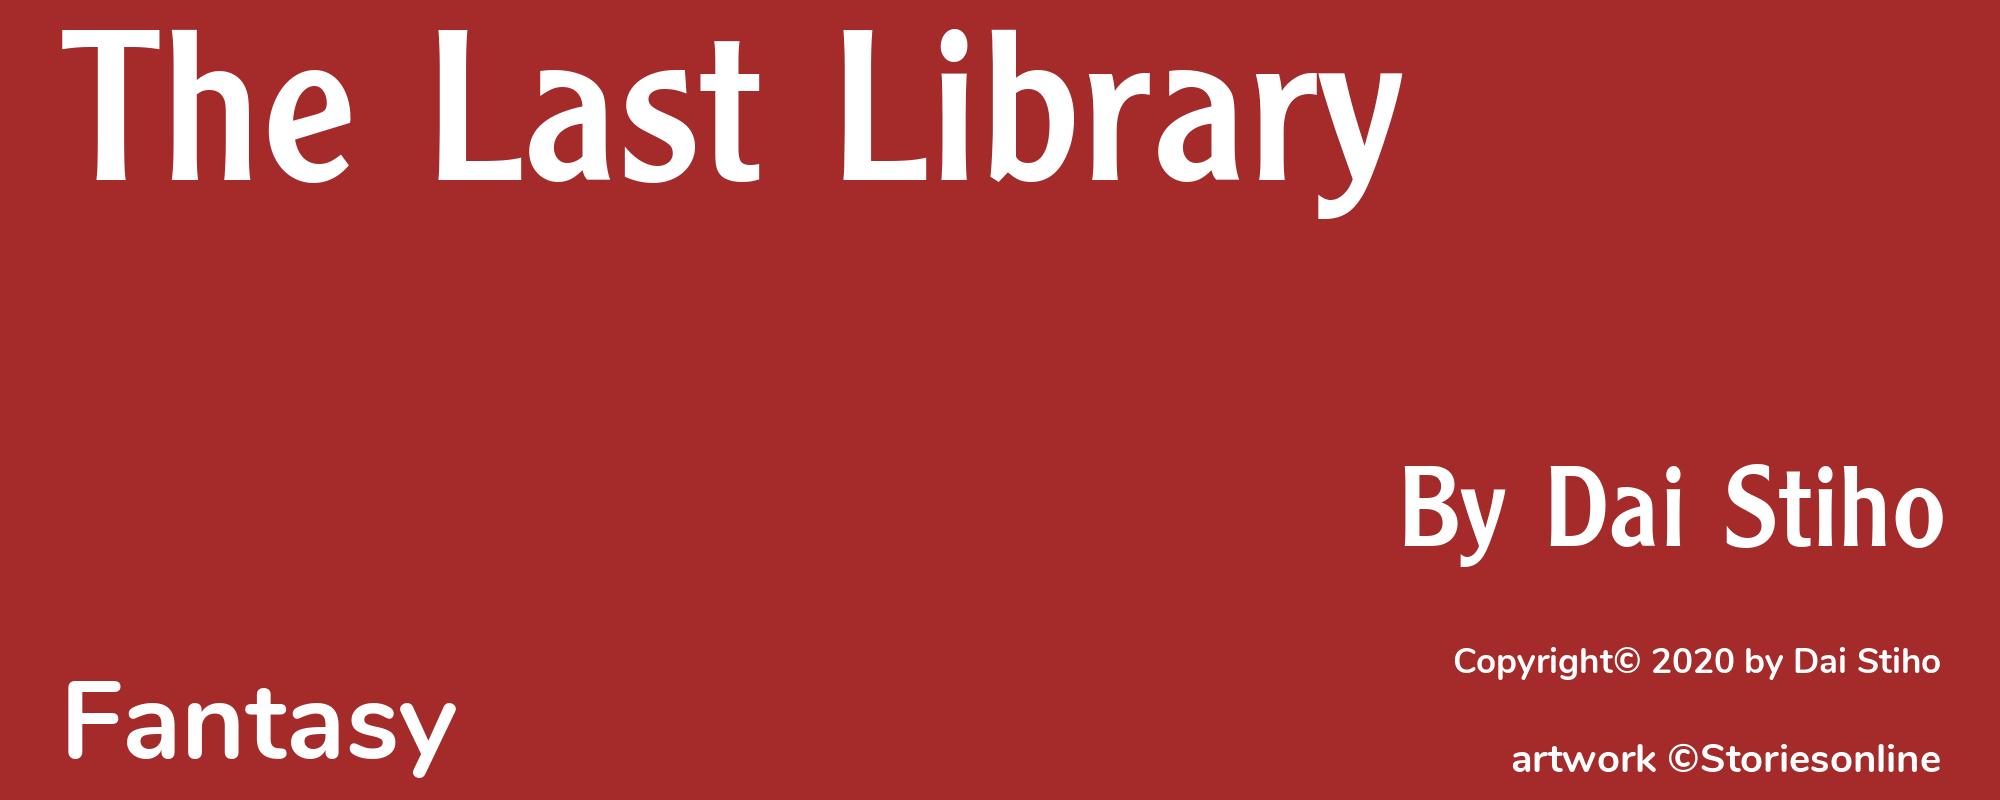 The Last Library - Cover